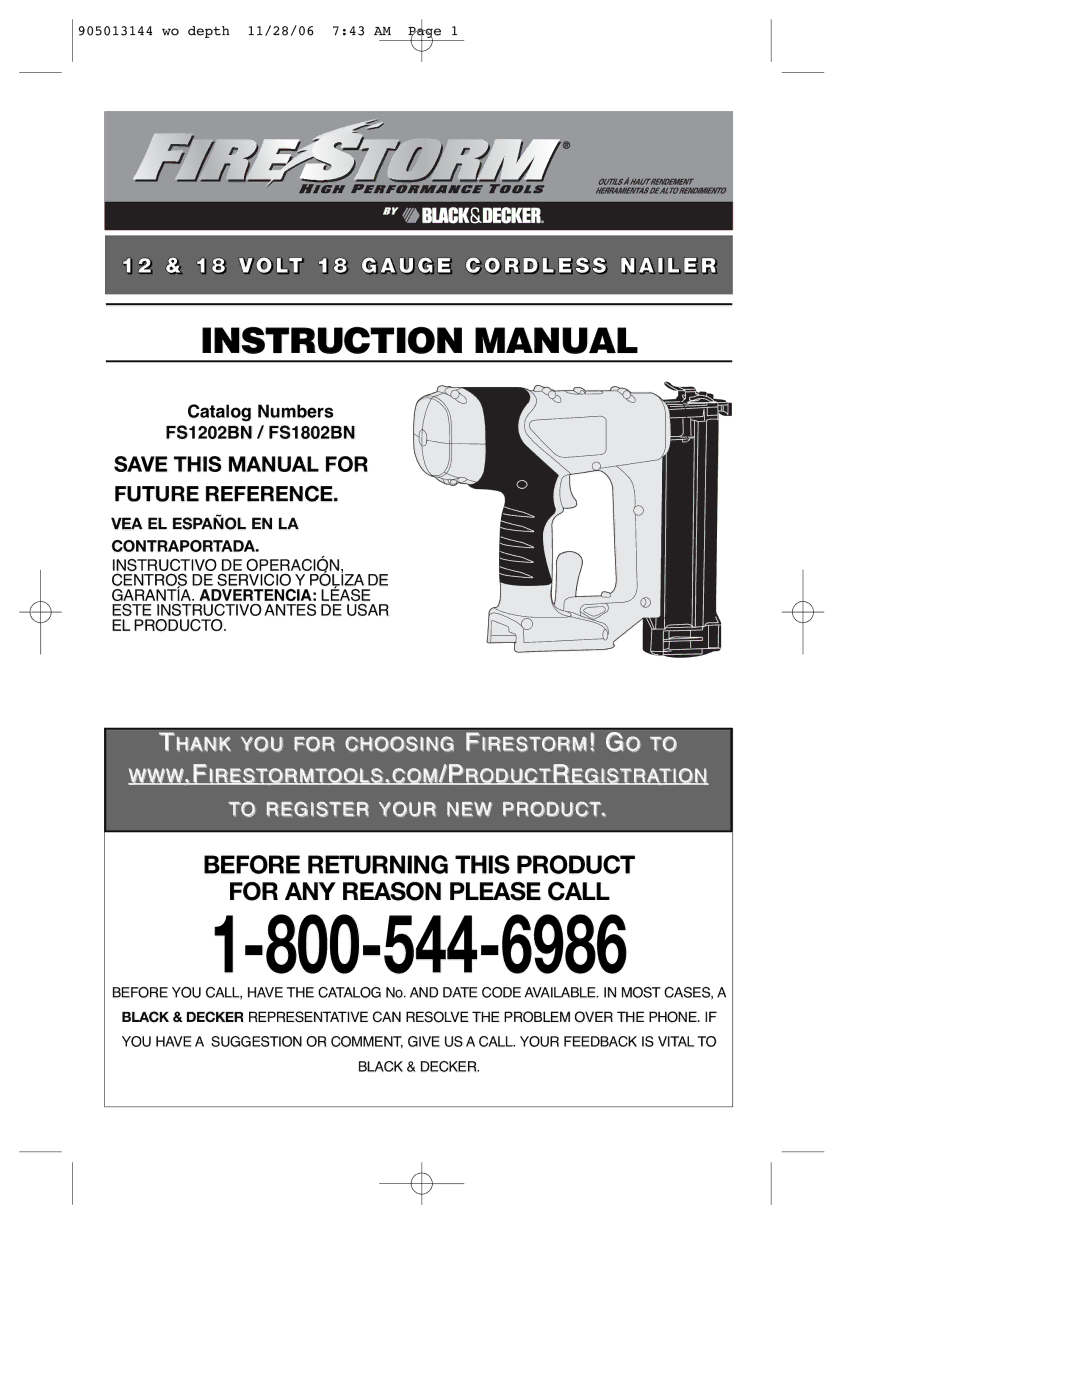 Black & Decker FS1202BN, FS1802BN instruction manual Before Returning this Product For ANY Reason Please Call 